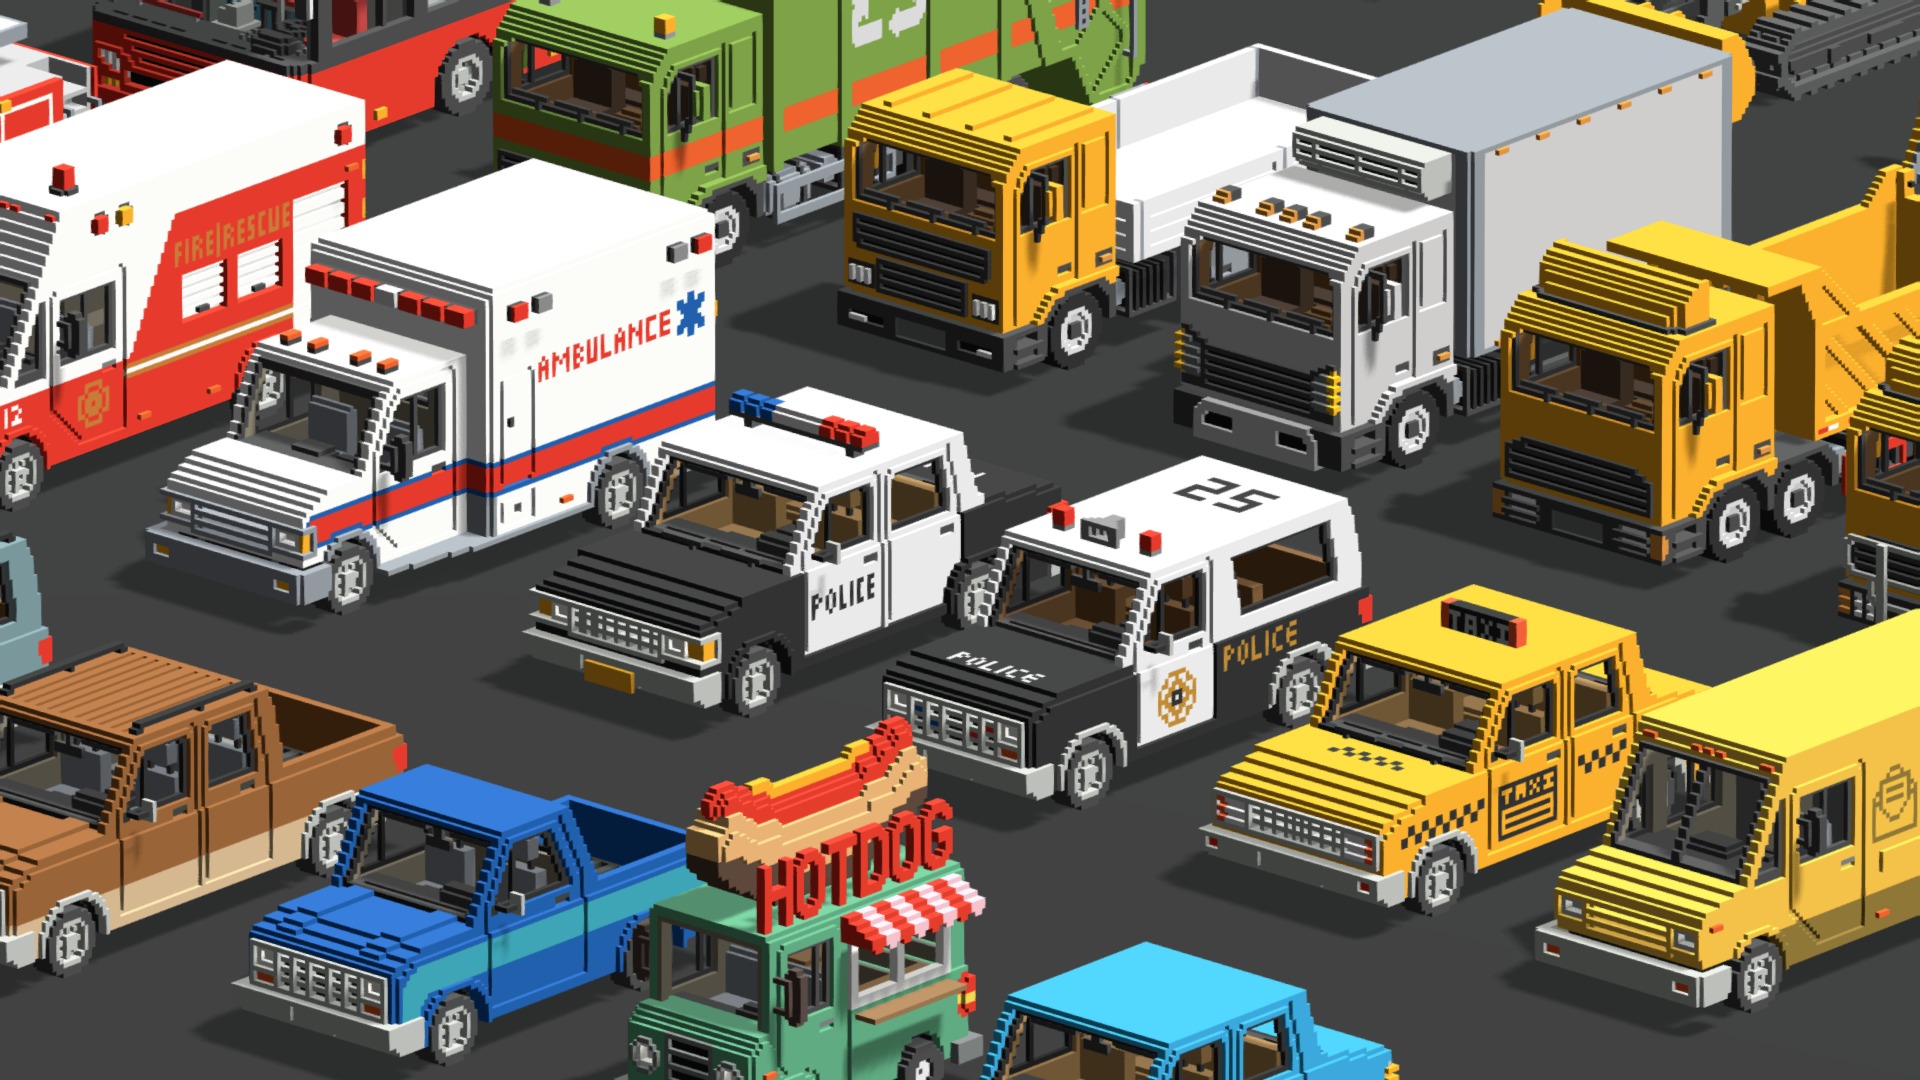 3D model Voxel Vehicles Pack (24 Vehicles) - This is a 3D model of the Voxel Vehicles Pack (24 Vehicles). The 3D model is about a group of toy trucks.